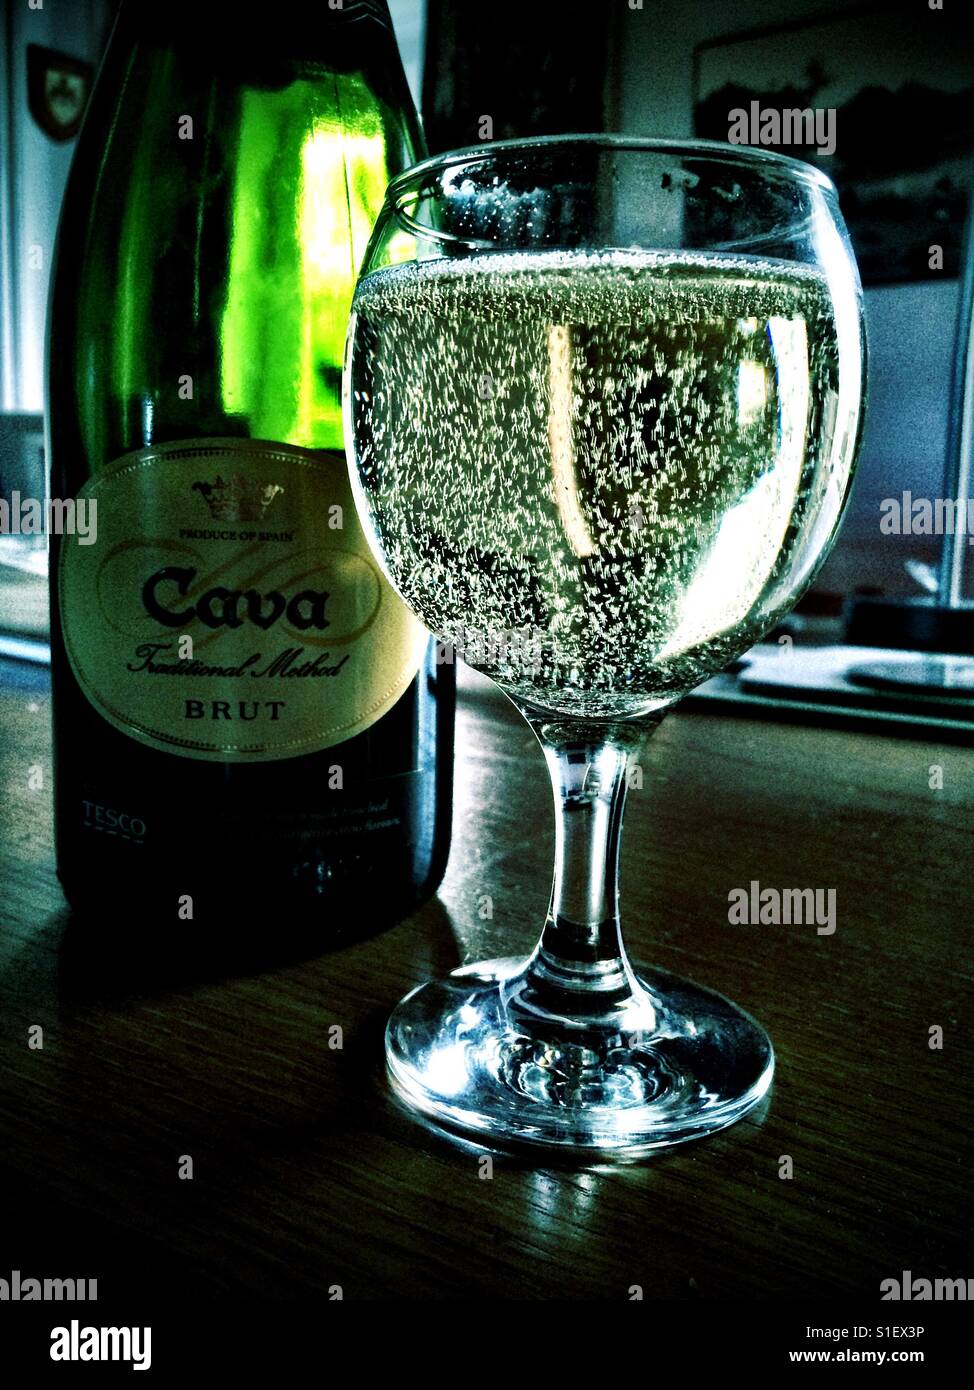 Bottle and glass of fizzy Cava wine from Spain Stock Photo